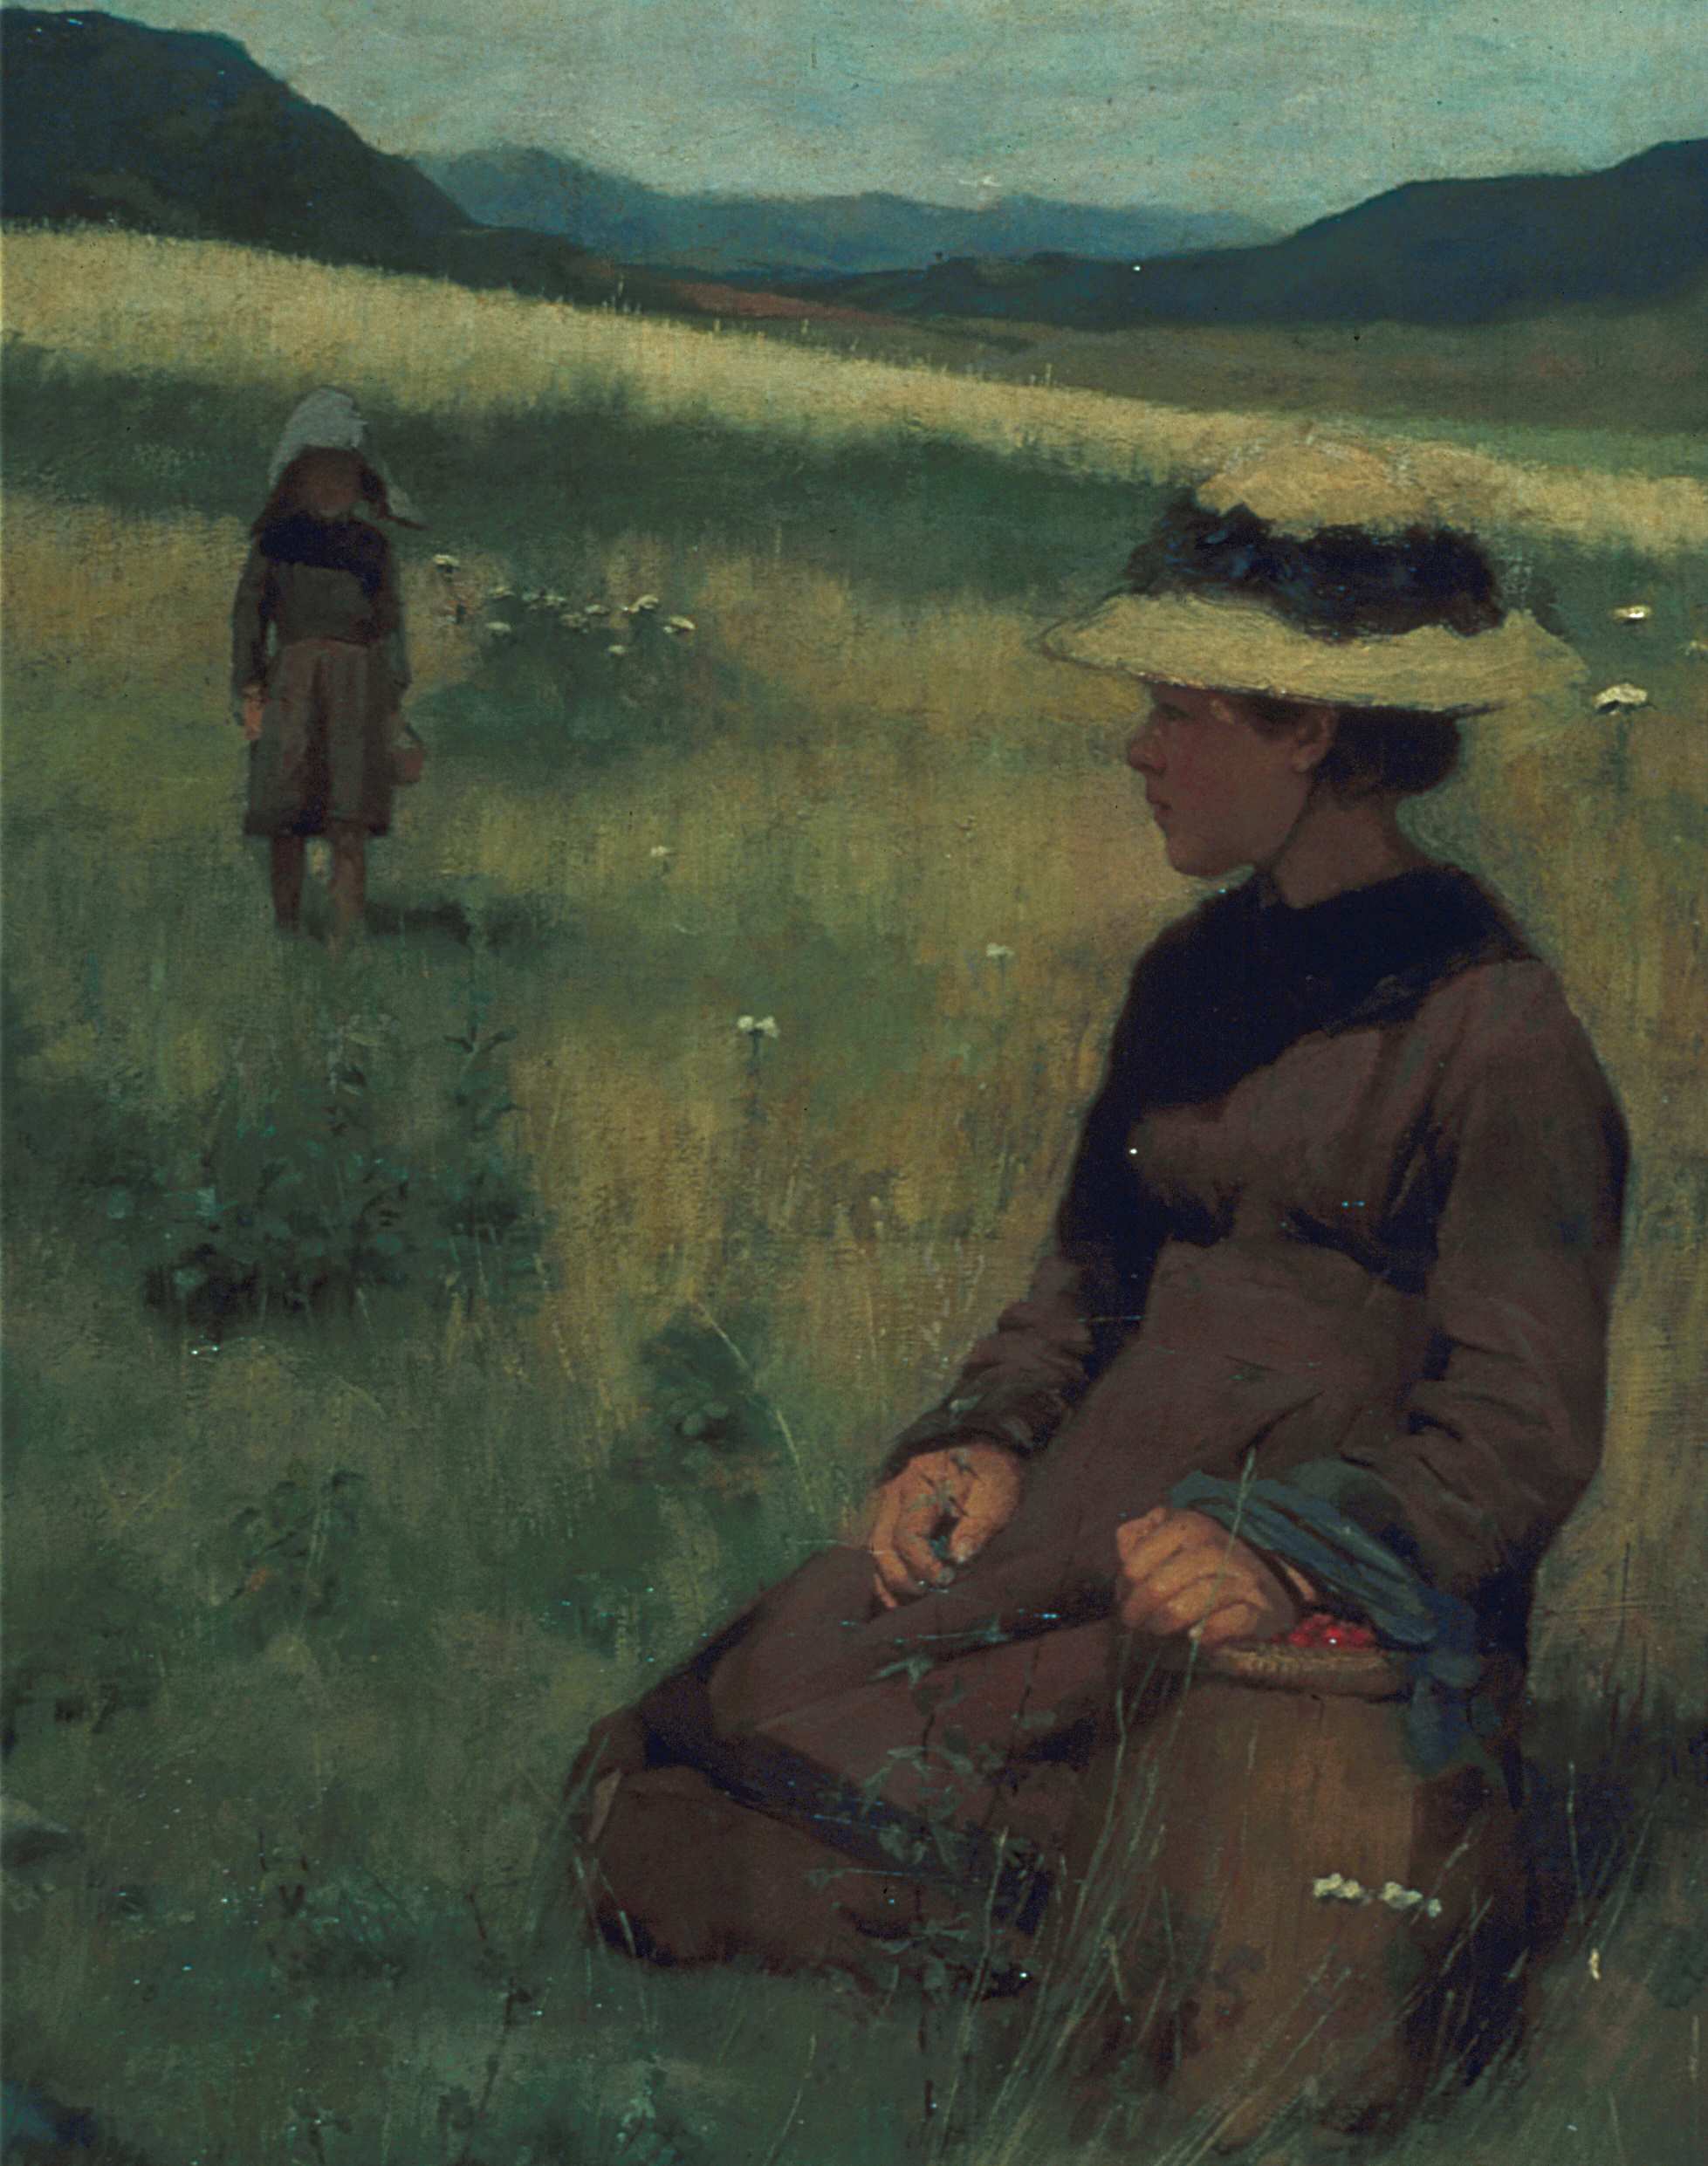 Painting of a kneeling girl picking strawberries in a field, with dark hills in the background.